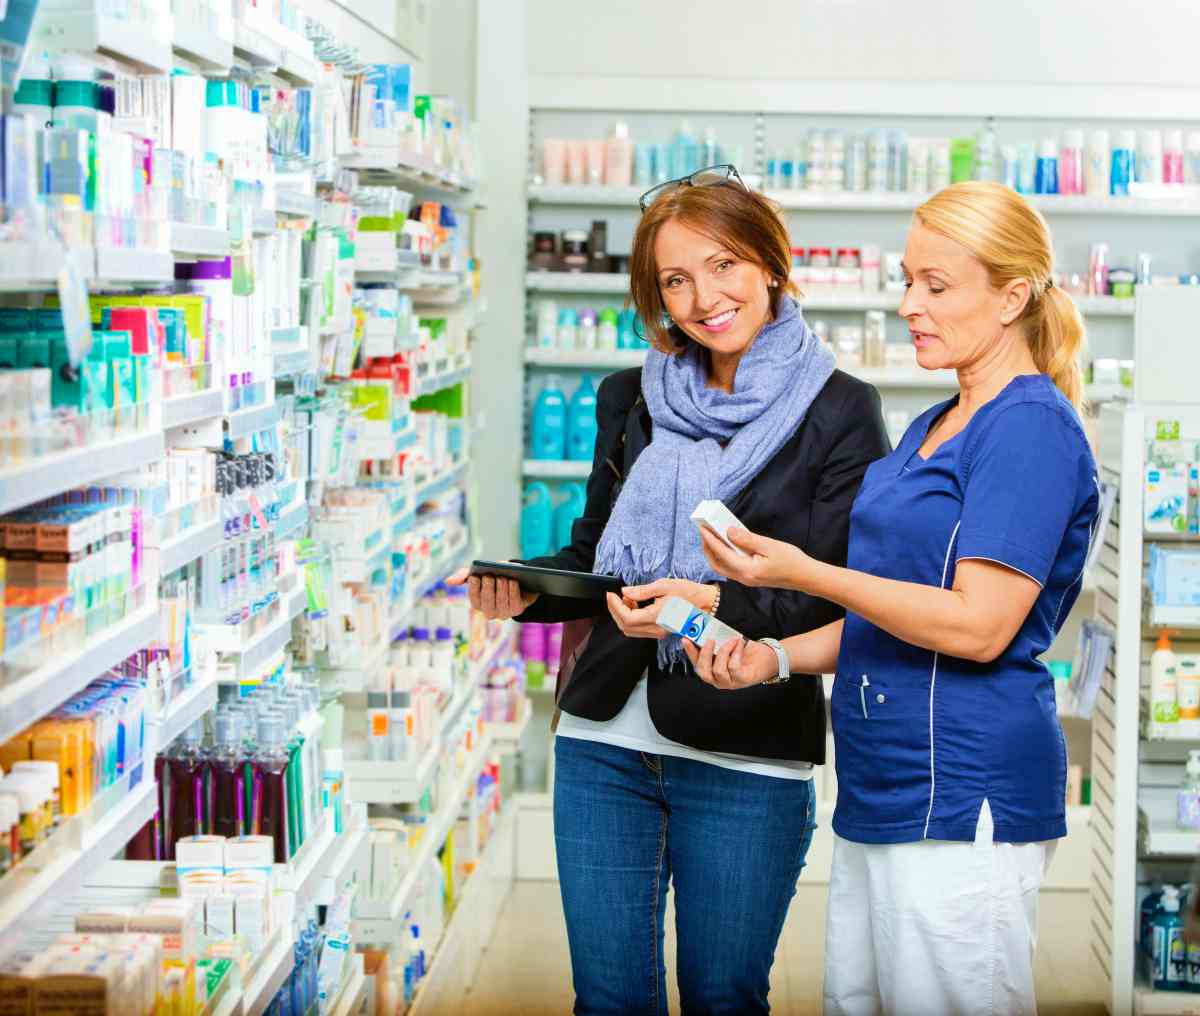 female customer standing with a chemist | Cross Selling And How It Can Drive Growth and Profitability To Your Business | cross-selling | crossselling